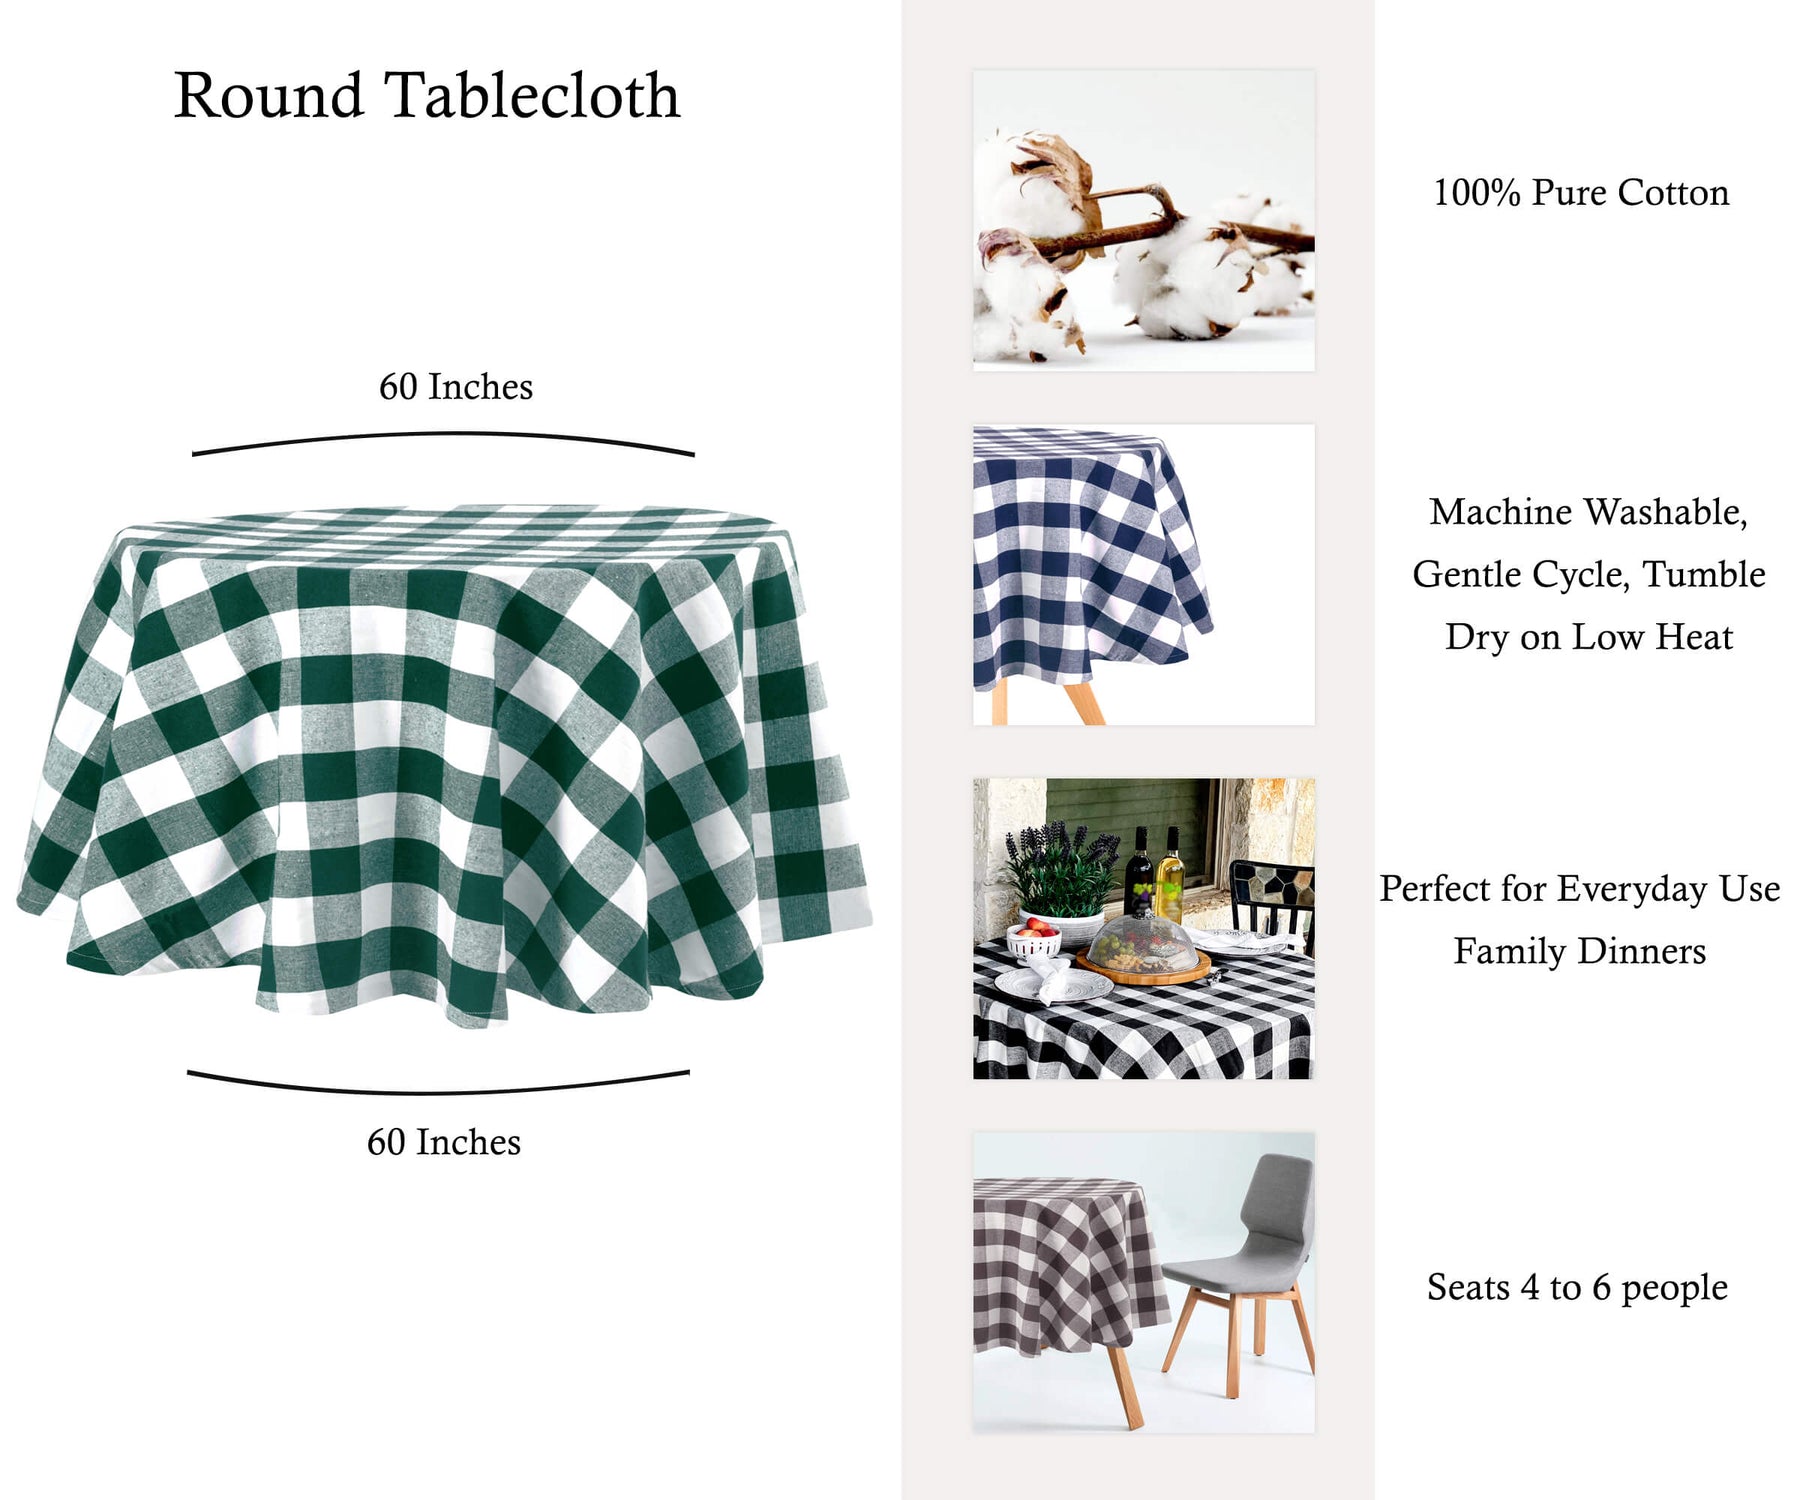 Assorted round tablecloths in various colors and sizes